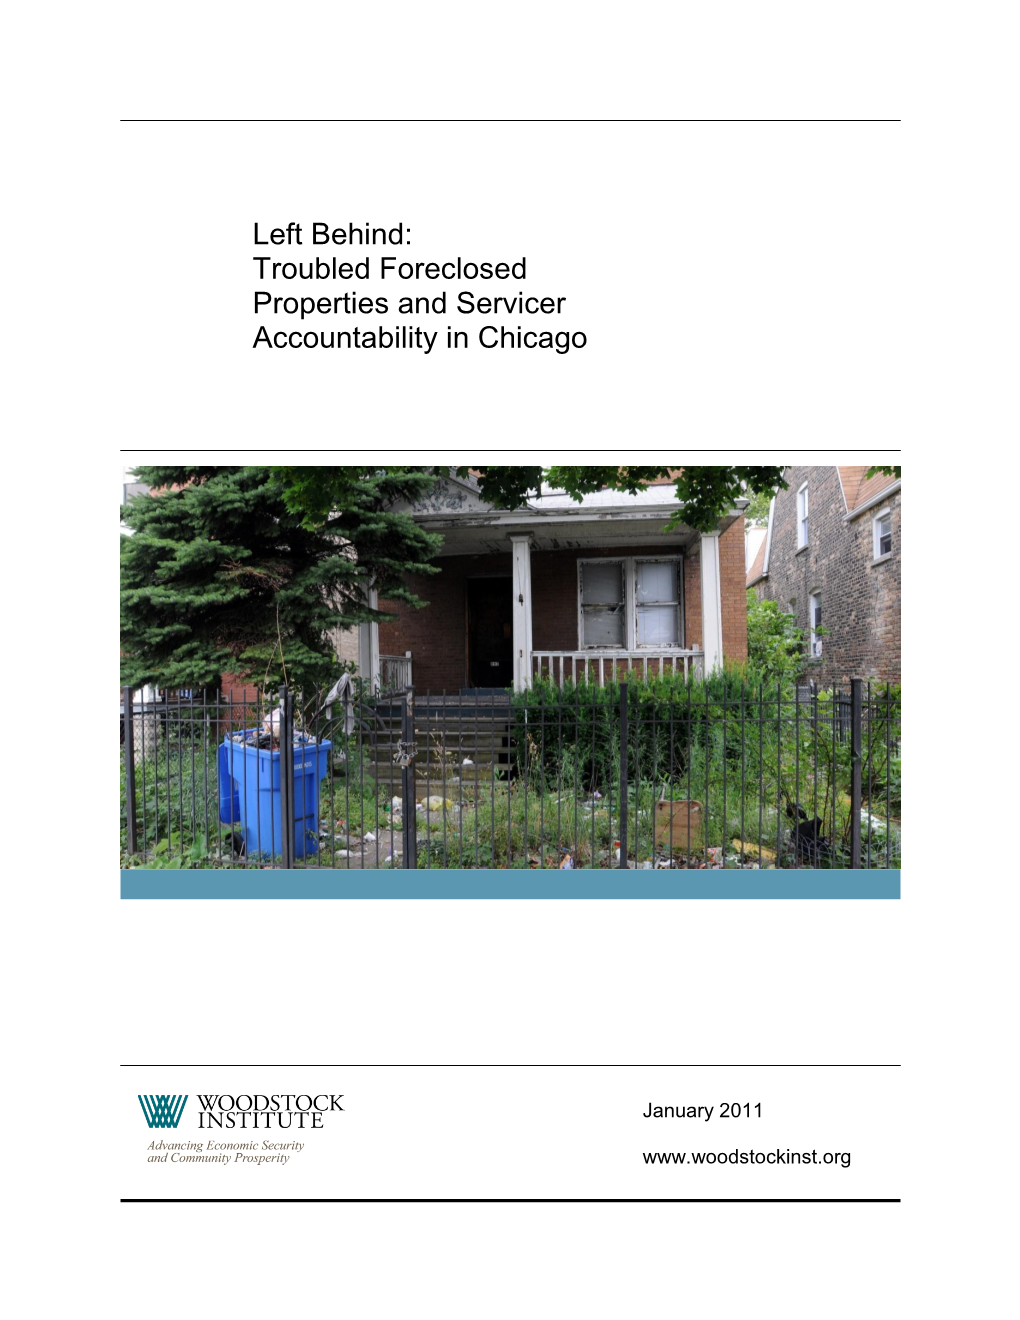 Left Behind: Troubled Foreclosed Properties and Servicer Accountability in Chicago